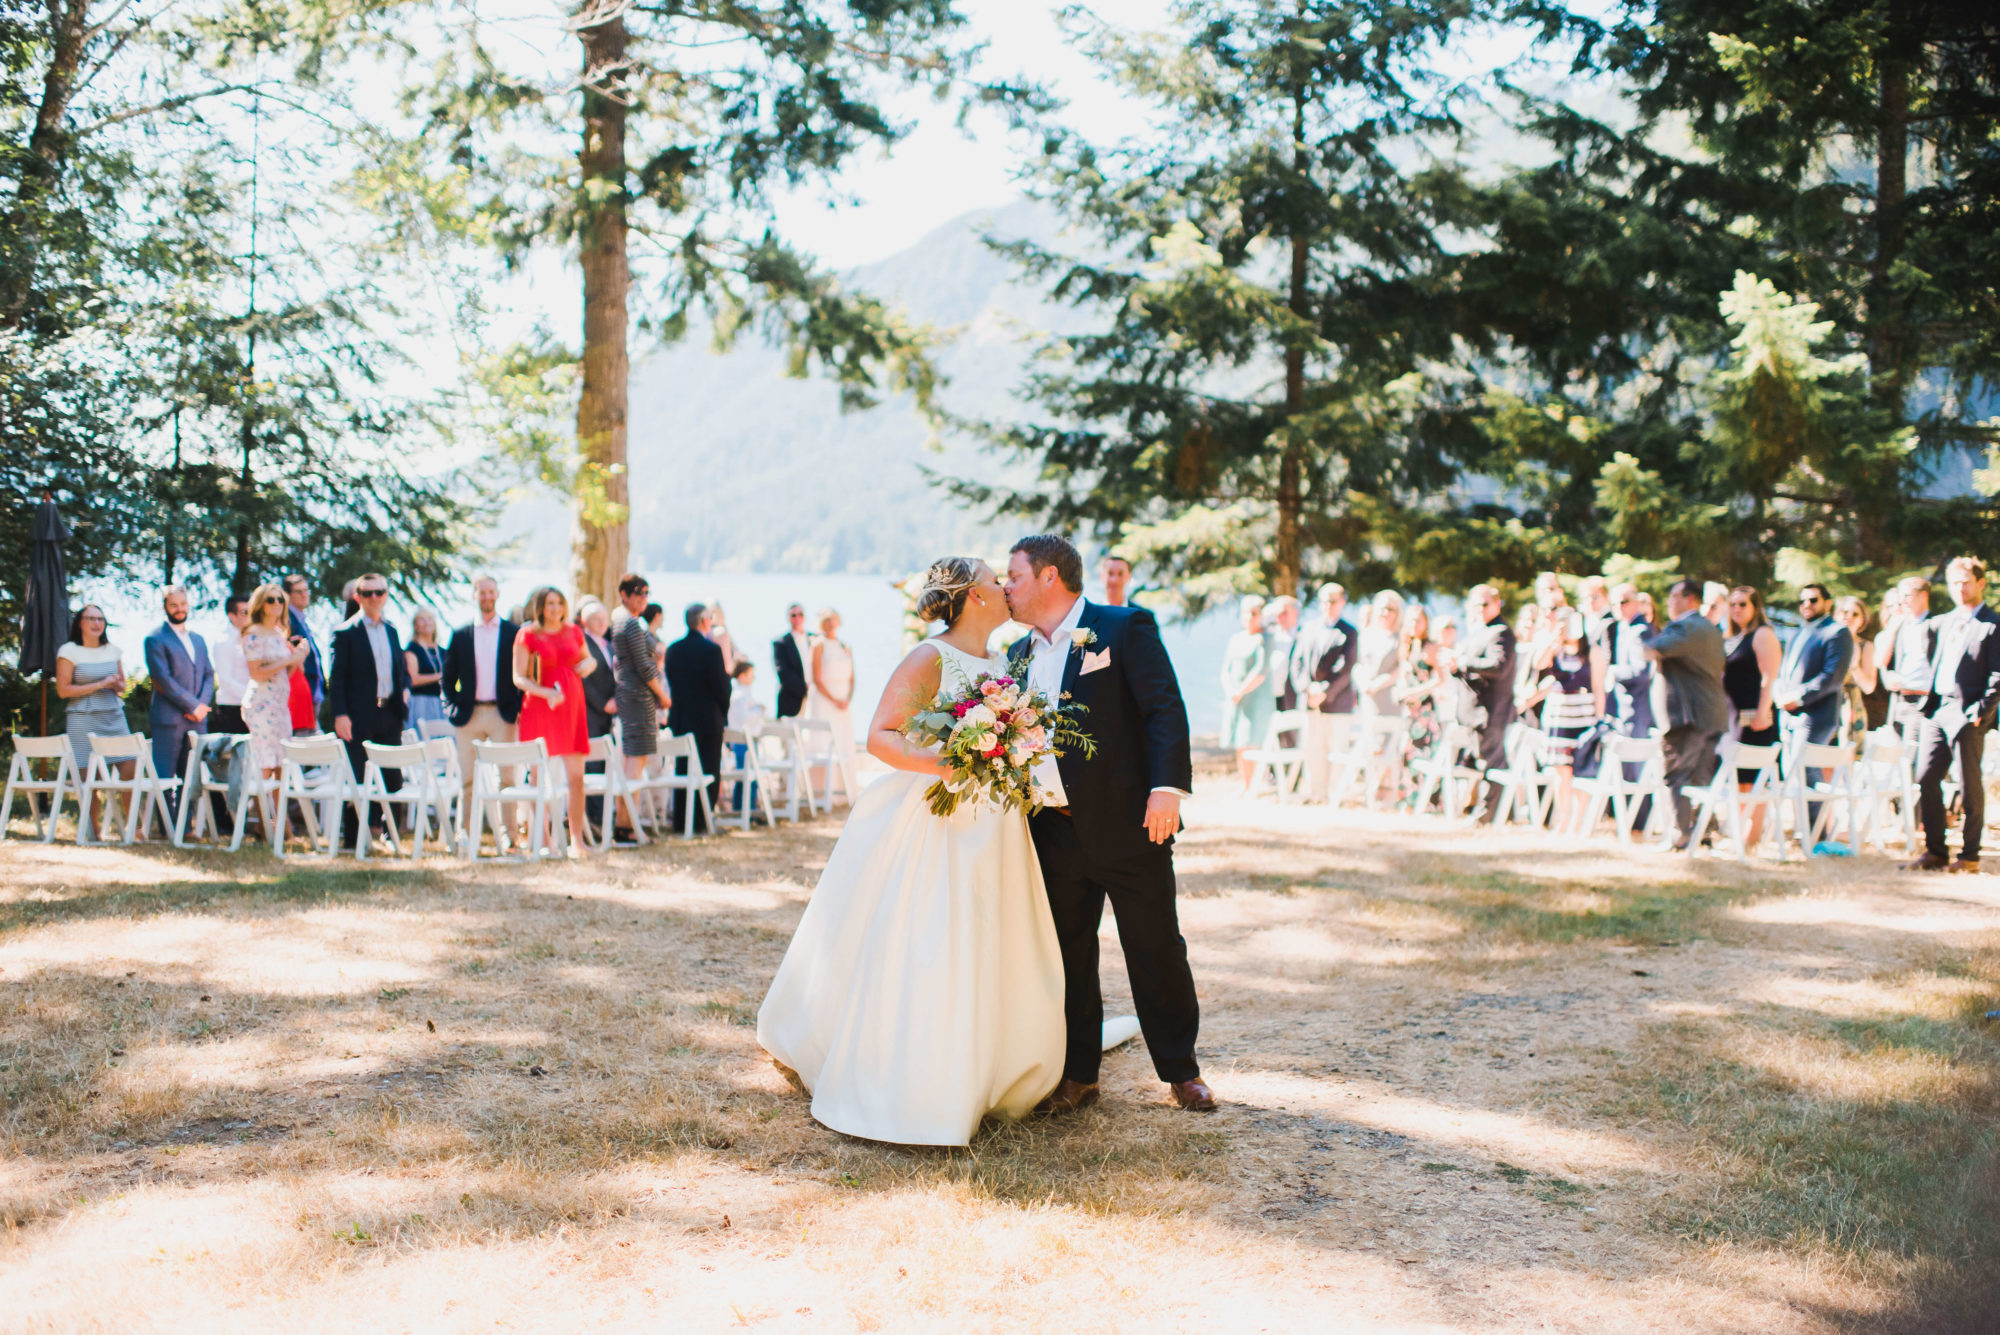 Bride and groom kissing at their wedding ceremony at Lake Crescent Lodge